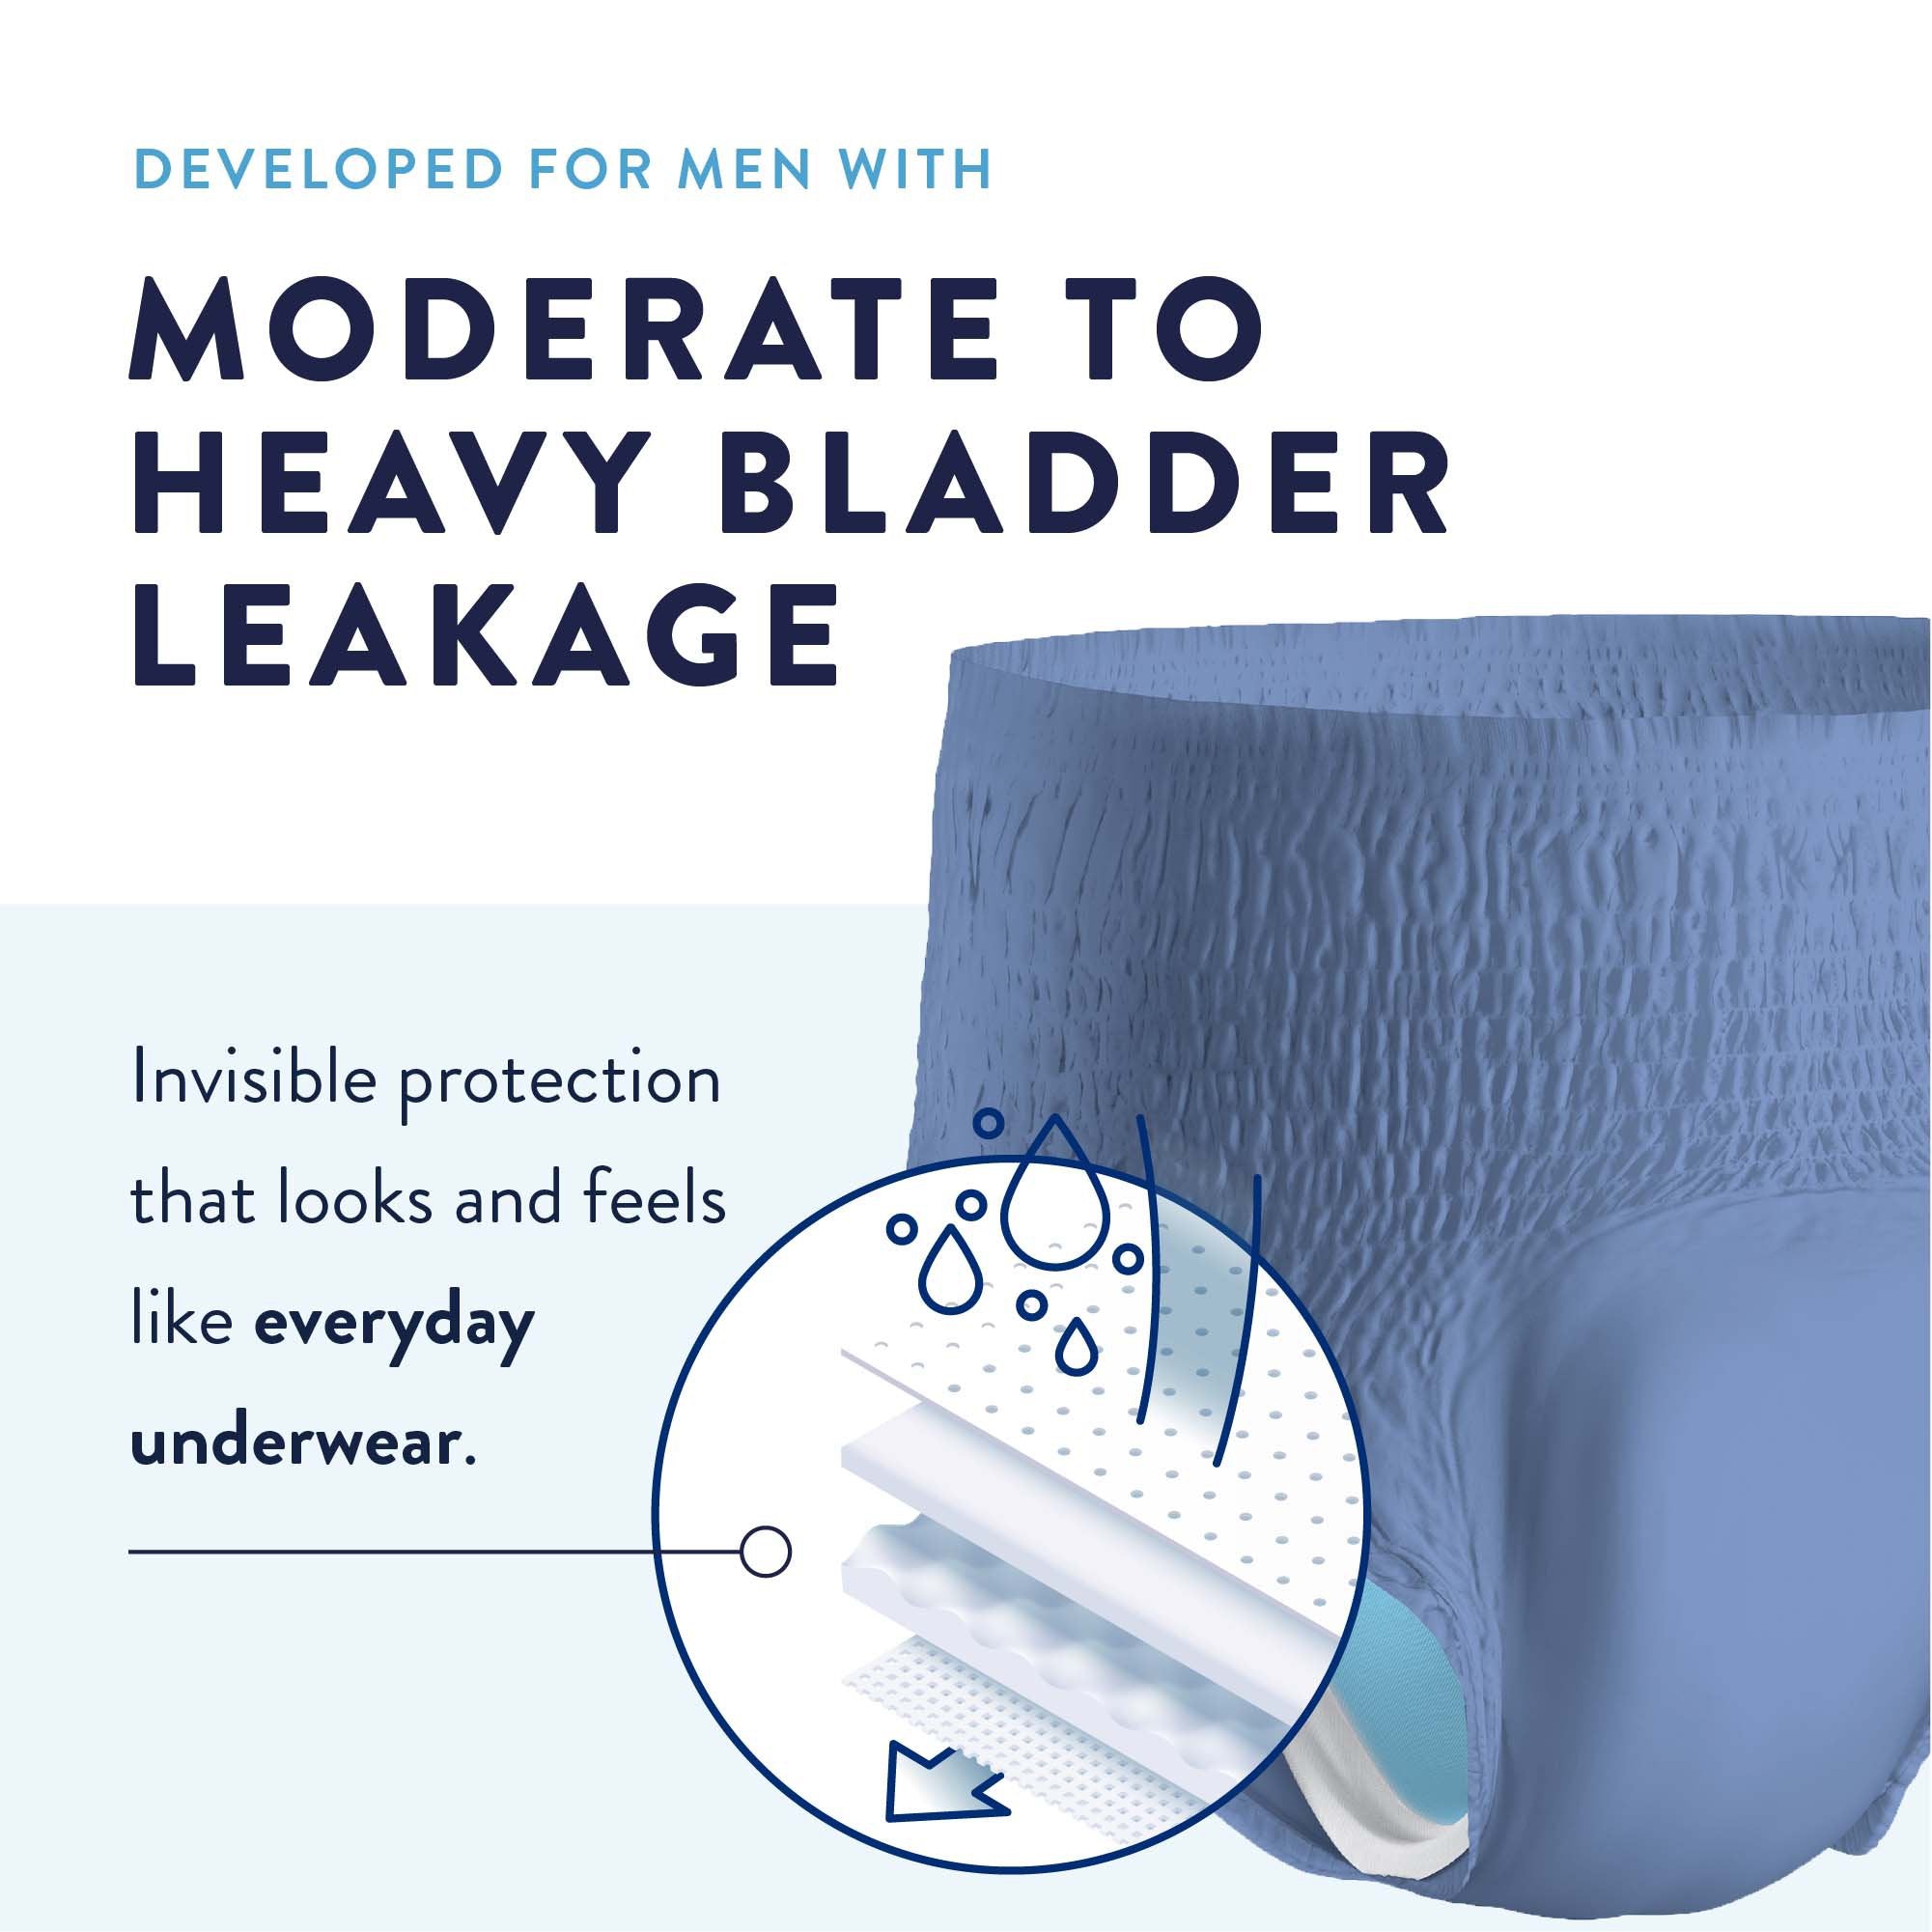 Male Adult Absorbent Underwear Prevail Per-Fit Men Pull On with Tear Away Seams X-Large Disposable Moderate Absorbency